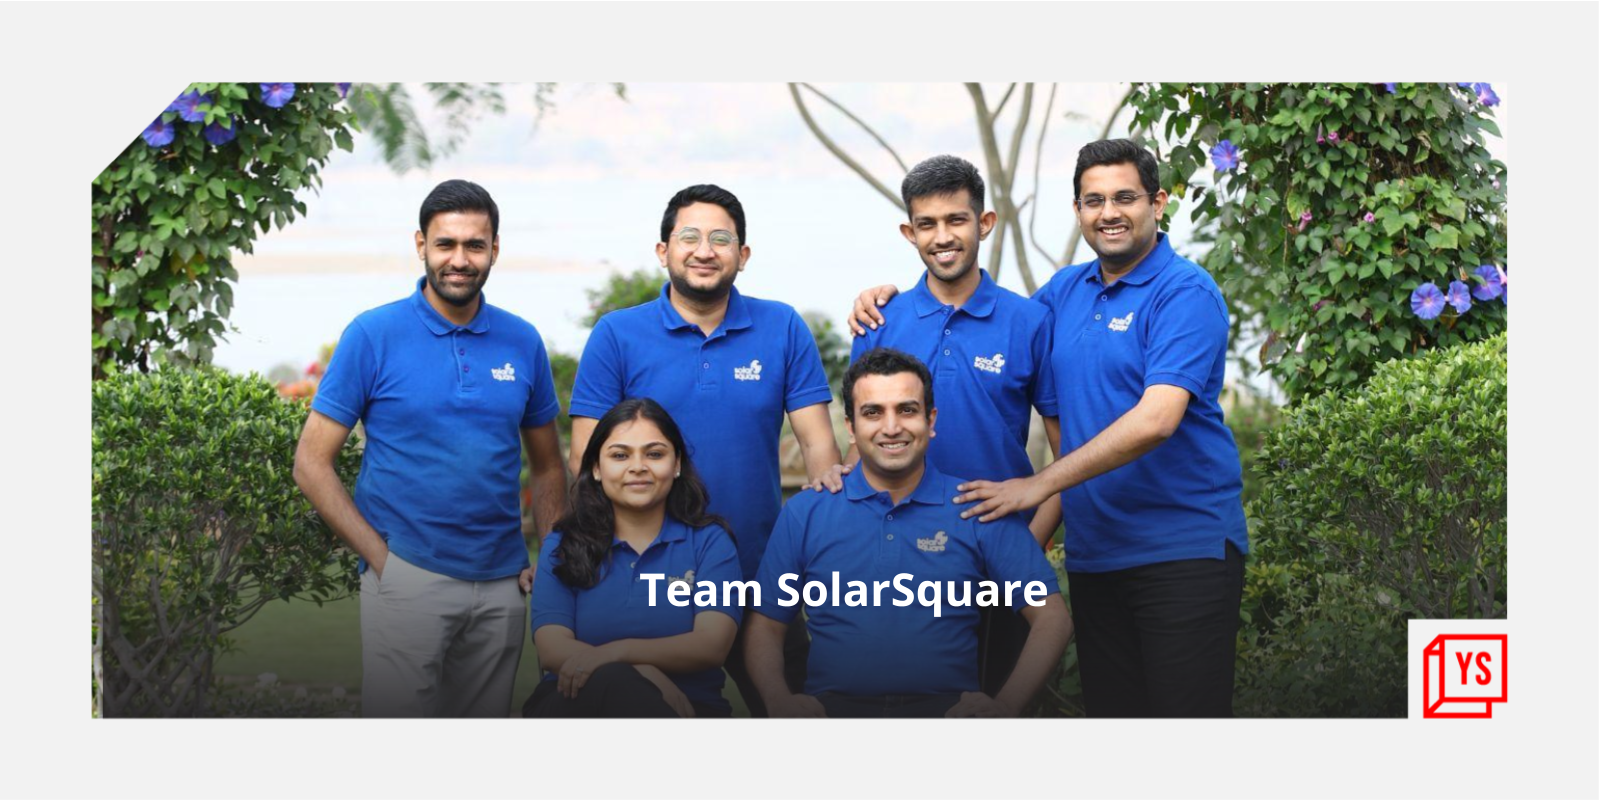 [Funding alert] SolarSquare raises $4 million in funding round led by Good Capital